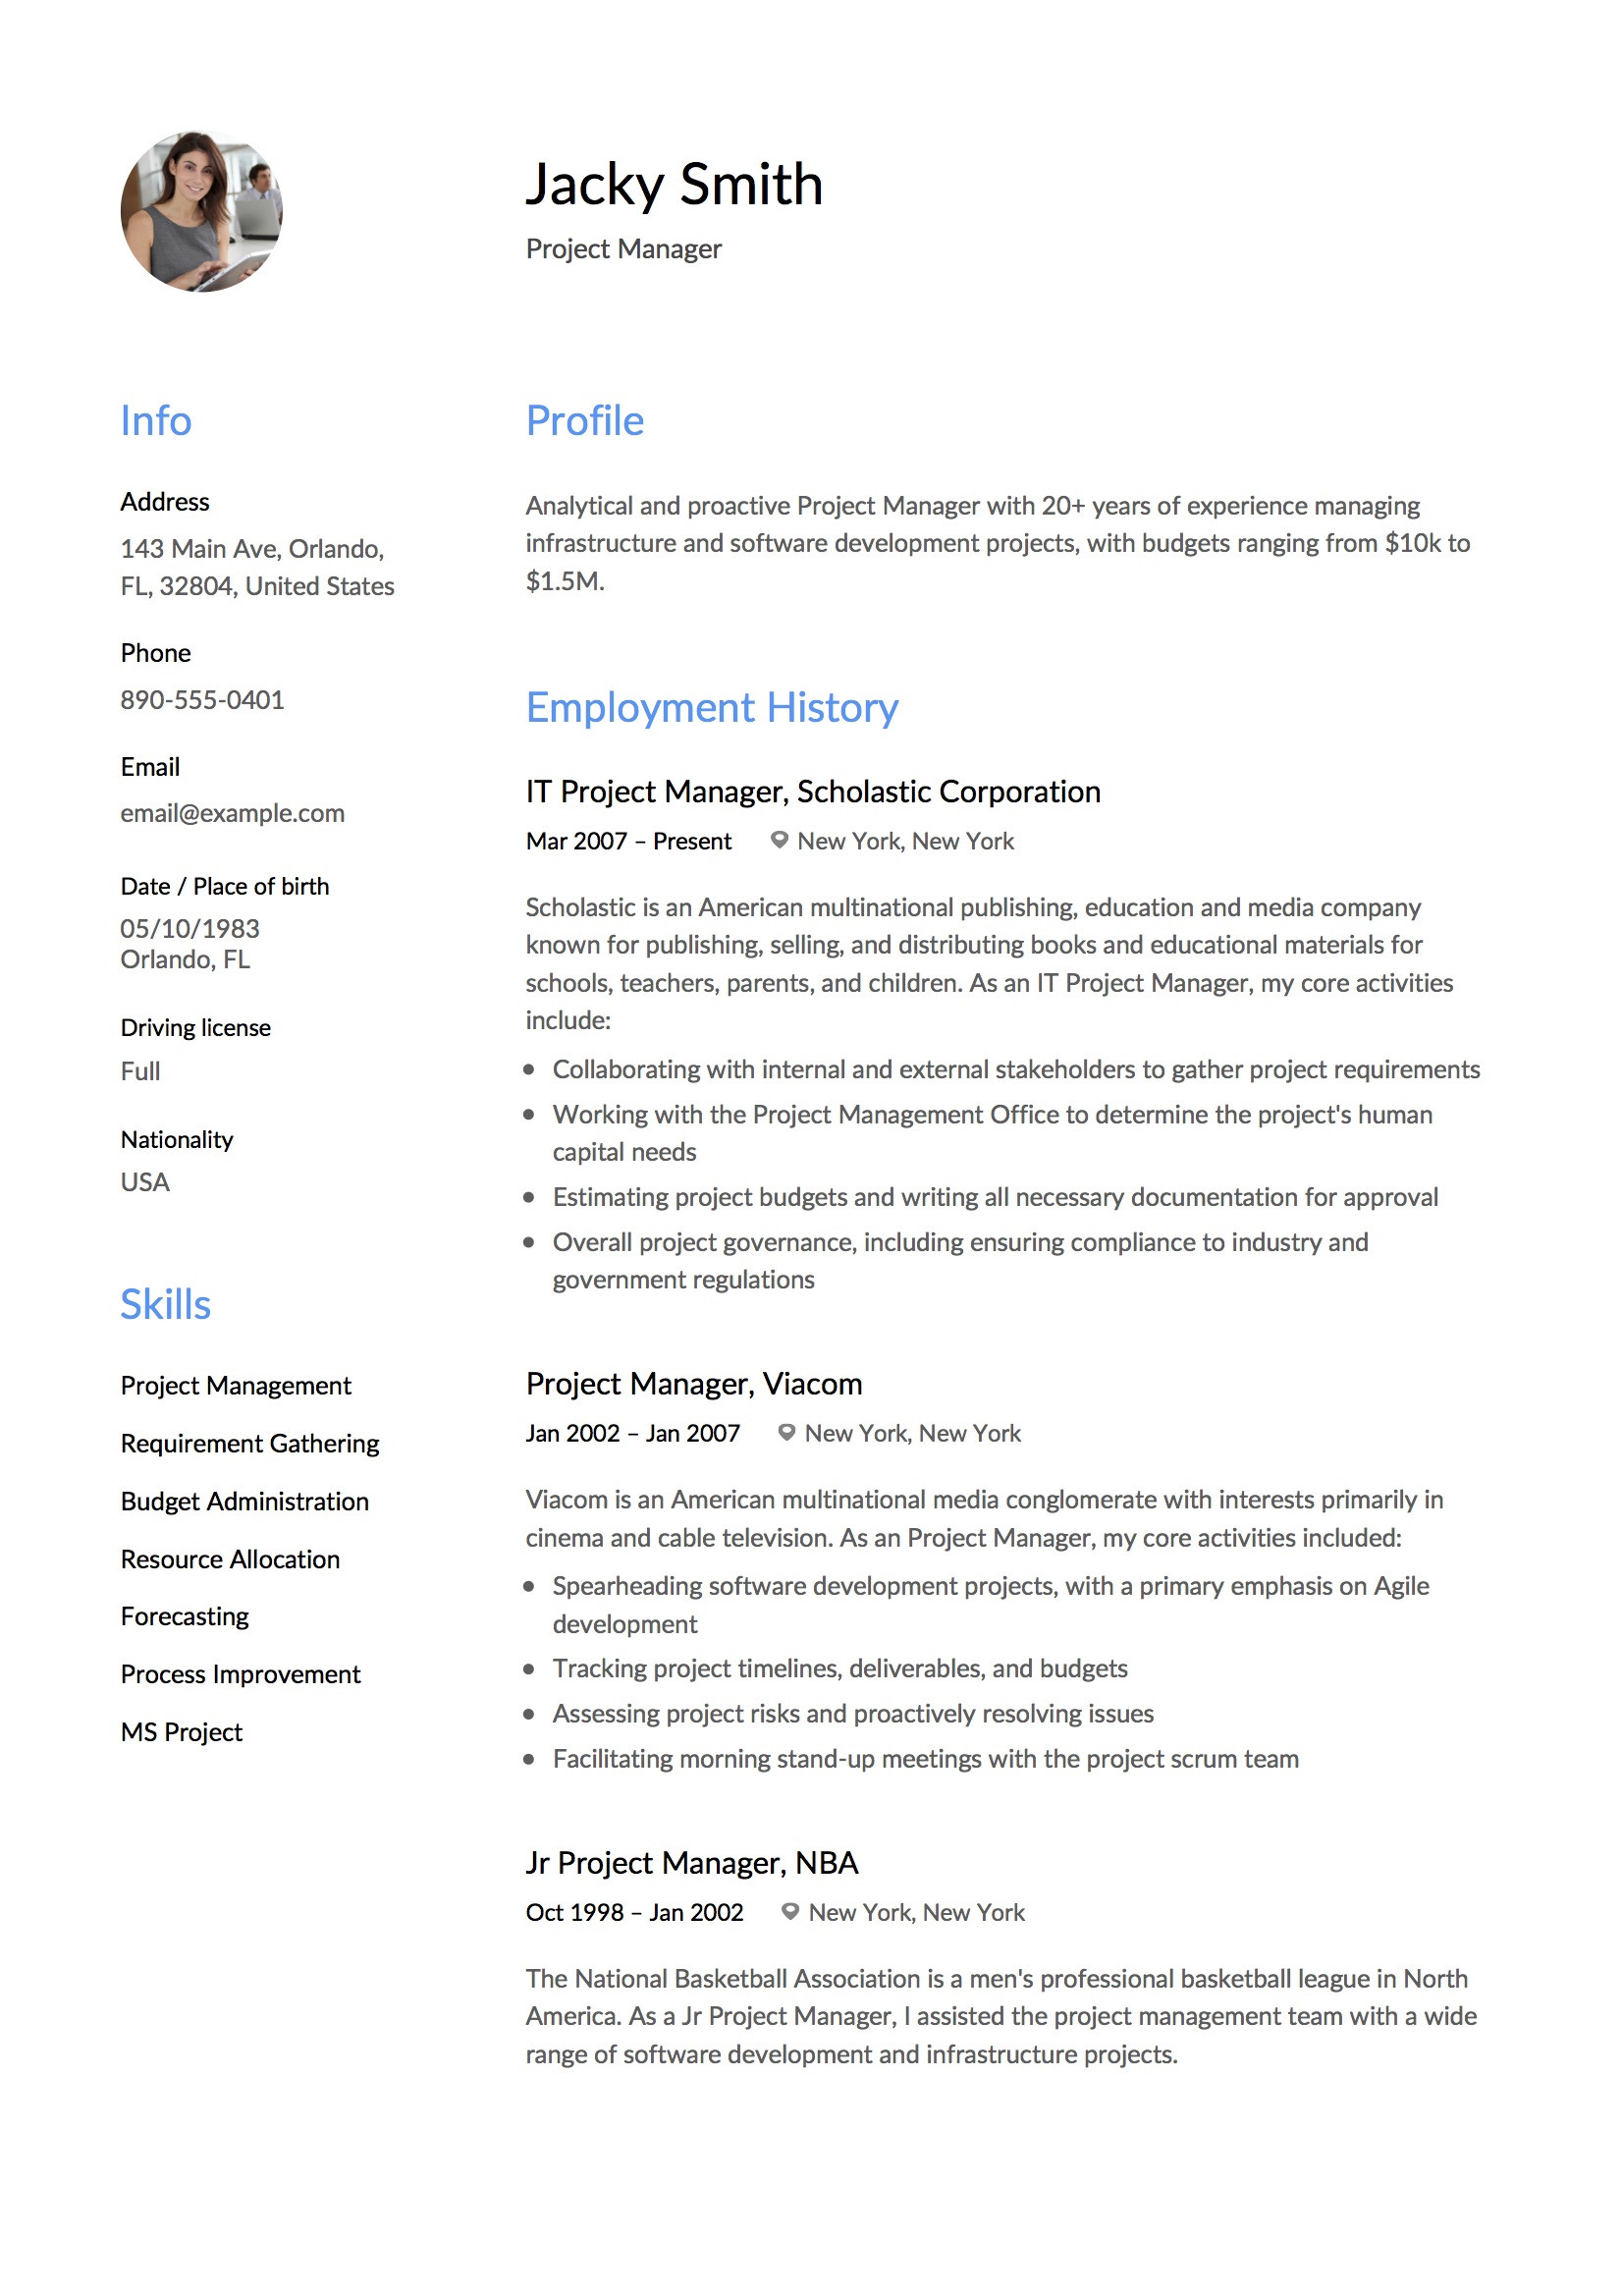 Financial Industry Project Manager Resume Sample 20 Project Manager Resumes & Full Guide Pdf & Word